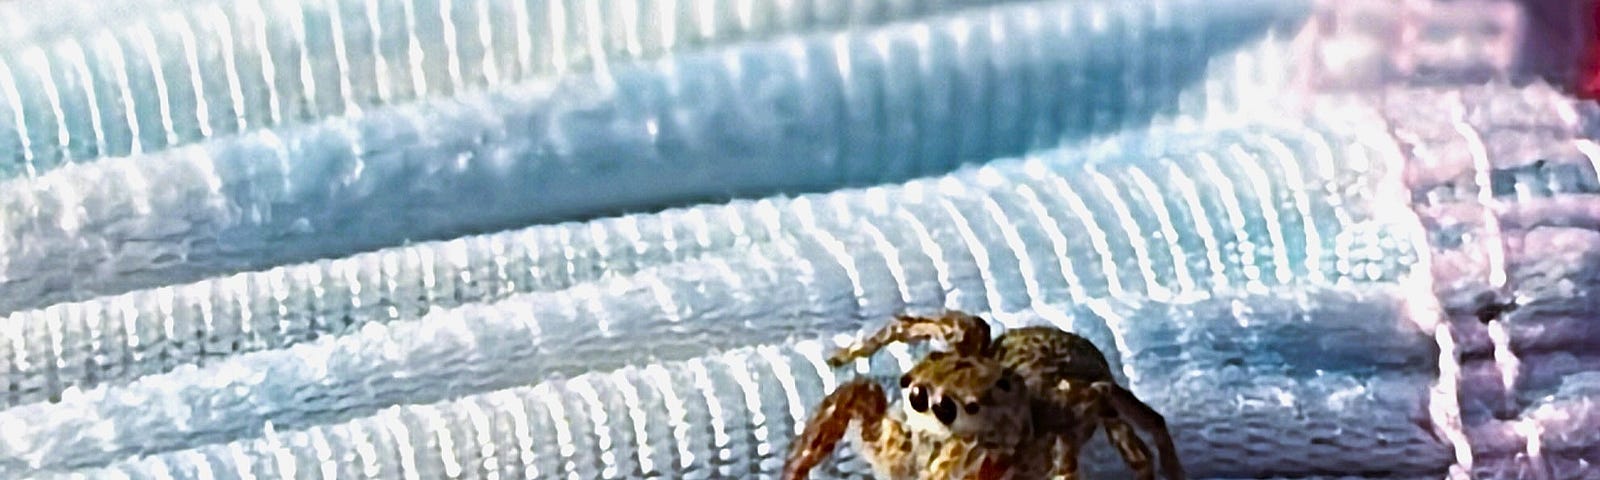 A little jumping spider, dubbed Lil’ Joe, being himself crawling on a leg. The yoga pants fabric is visible. (Photo Credit: Angelica Olson)